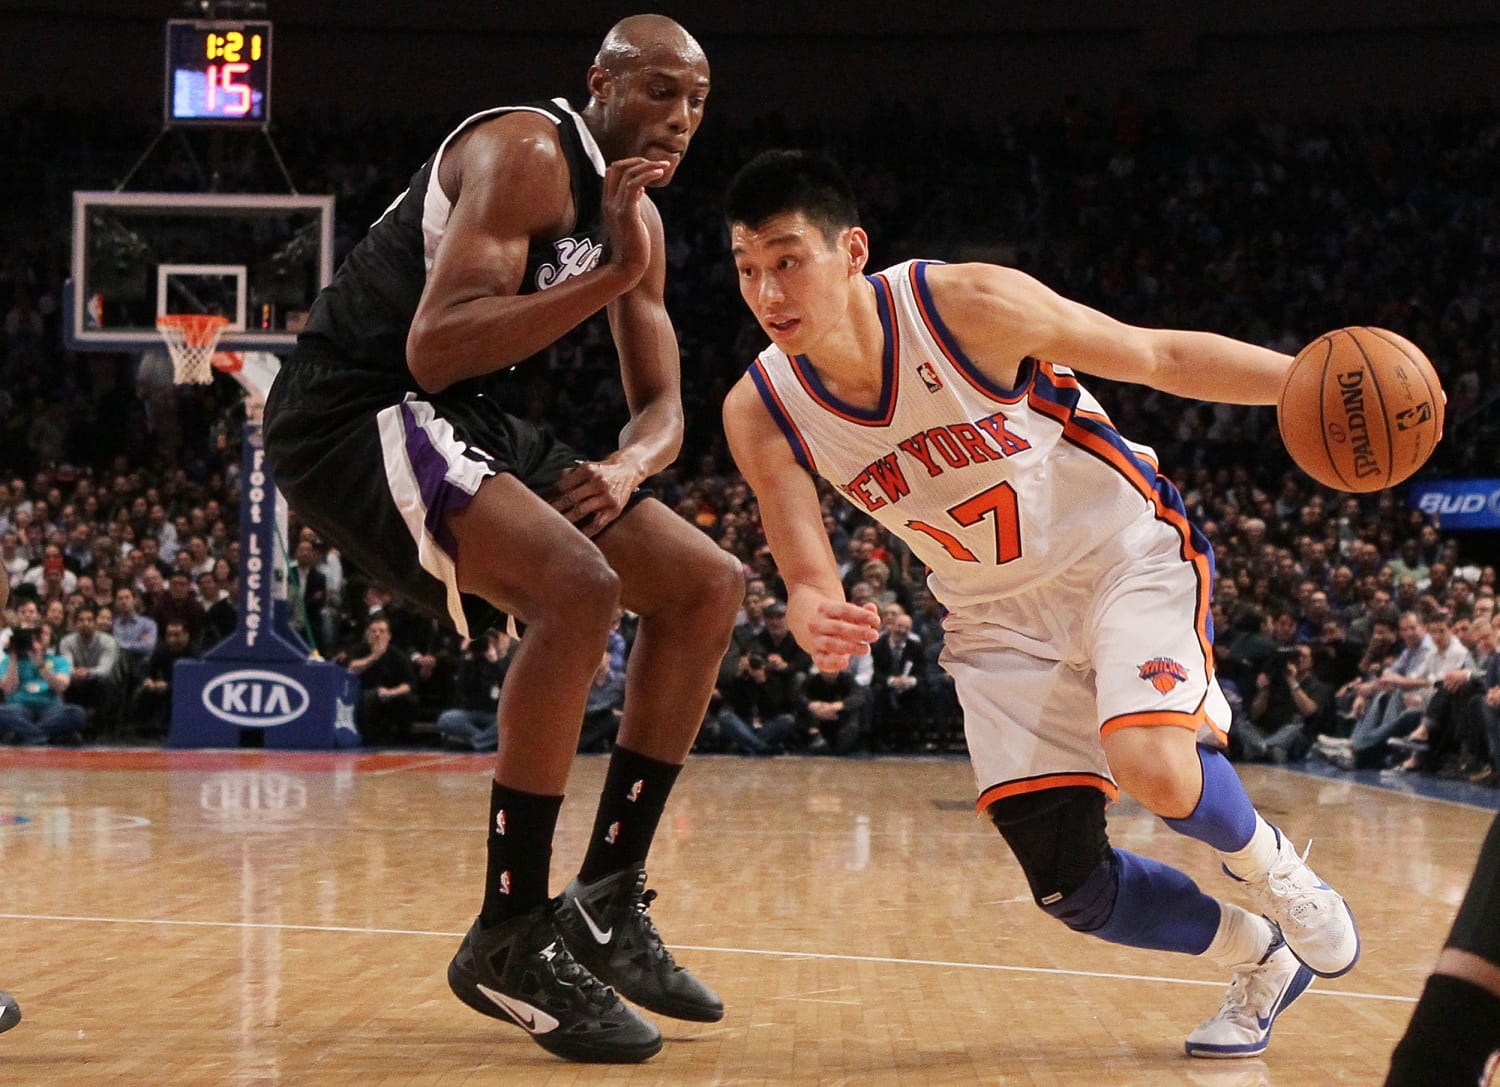 Jeremy Lin reflects on lessons he's learned as an Asian American